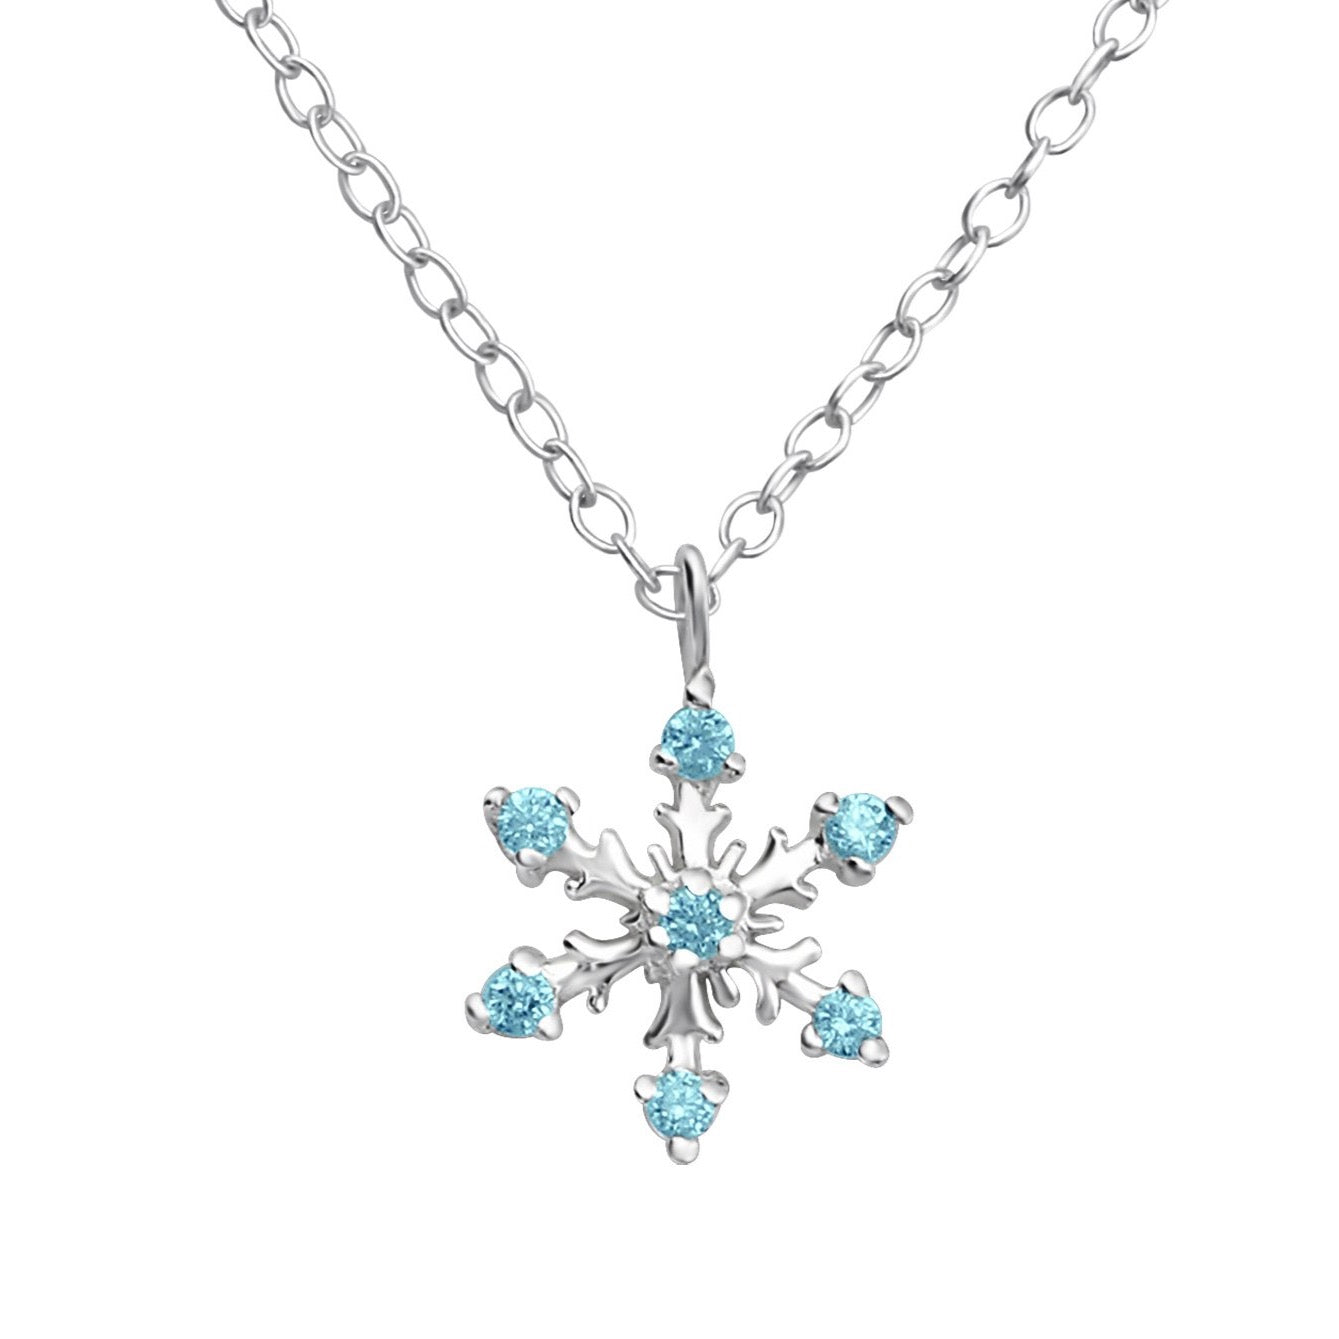 Pretty snowflake necklace with blue cubic zirconia crystals.